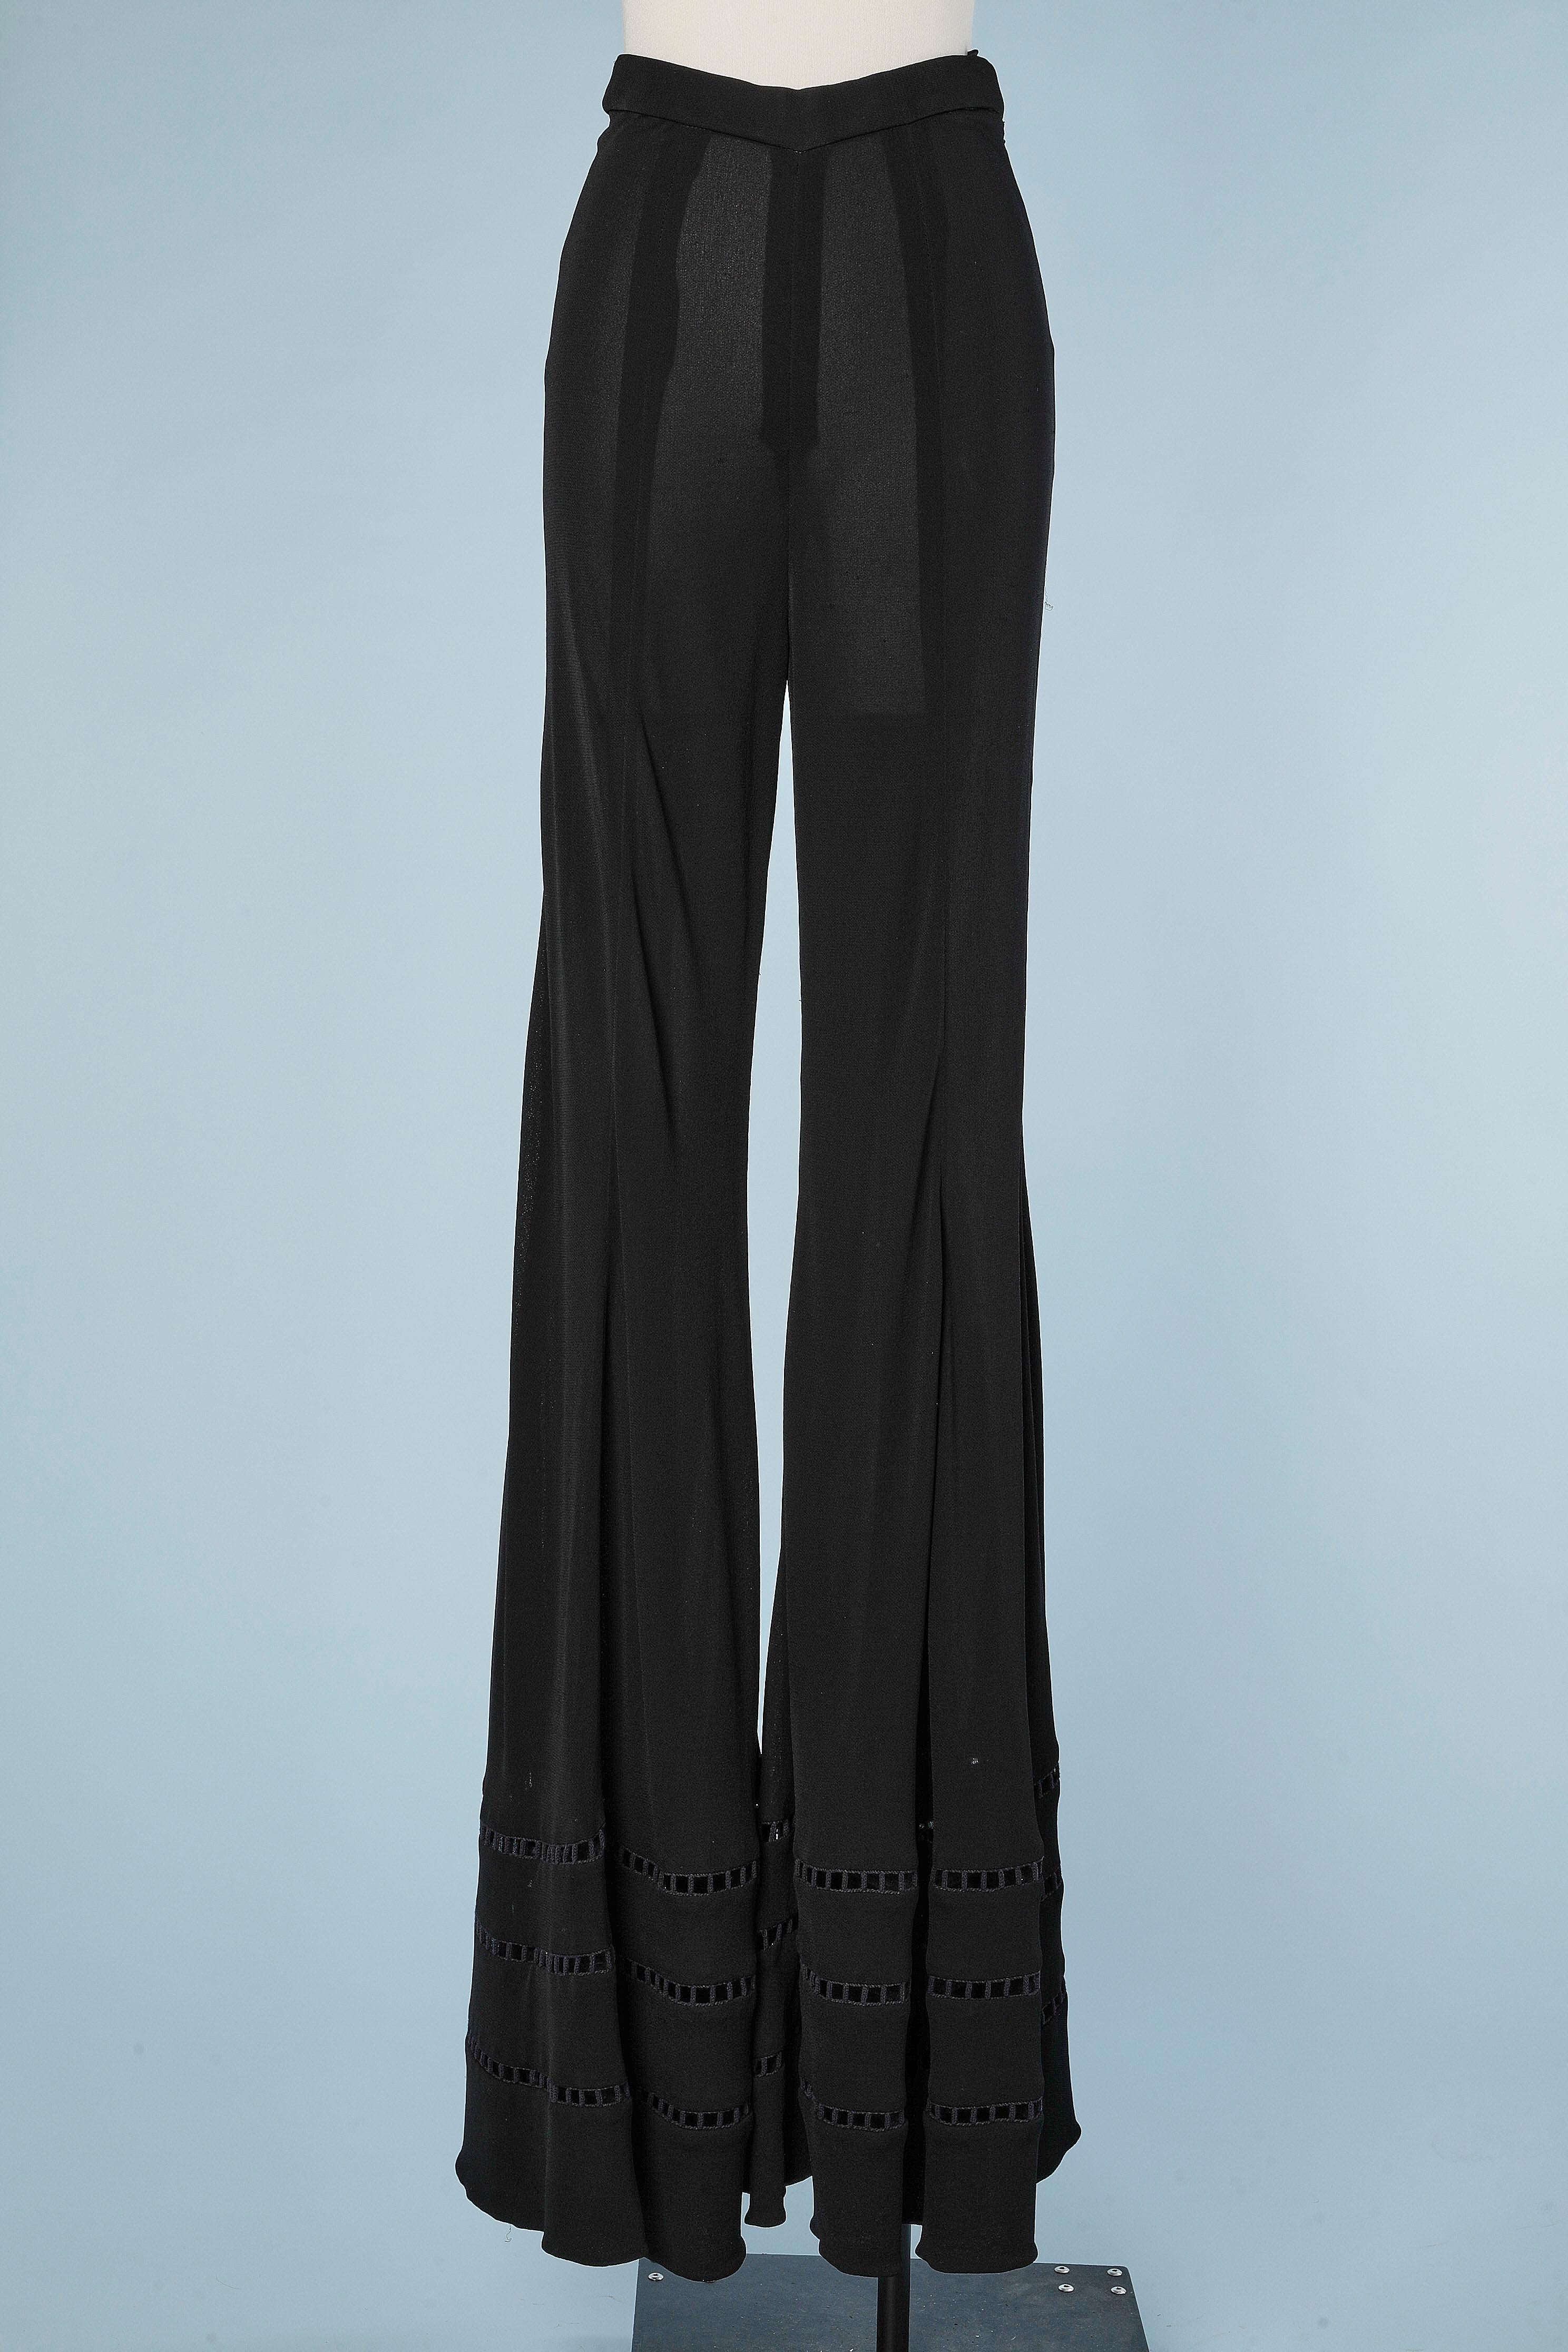 Wide-legs black crêpe jersey trouser with ajouré passementerie in the bottom. Zip on the left side. No lining. 
SIZE XS 